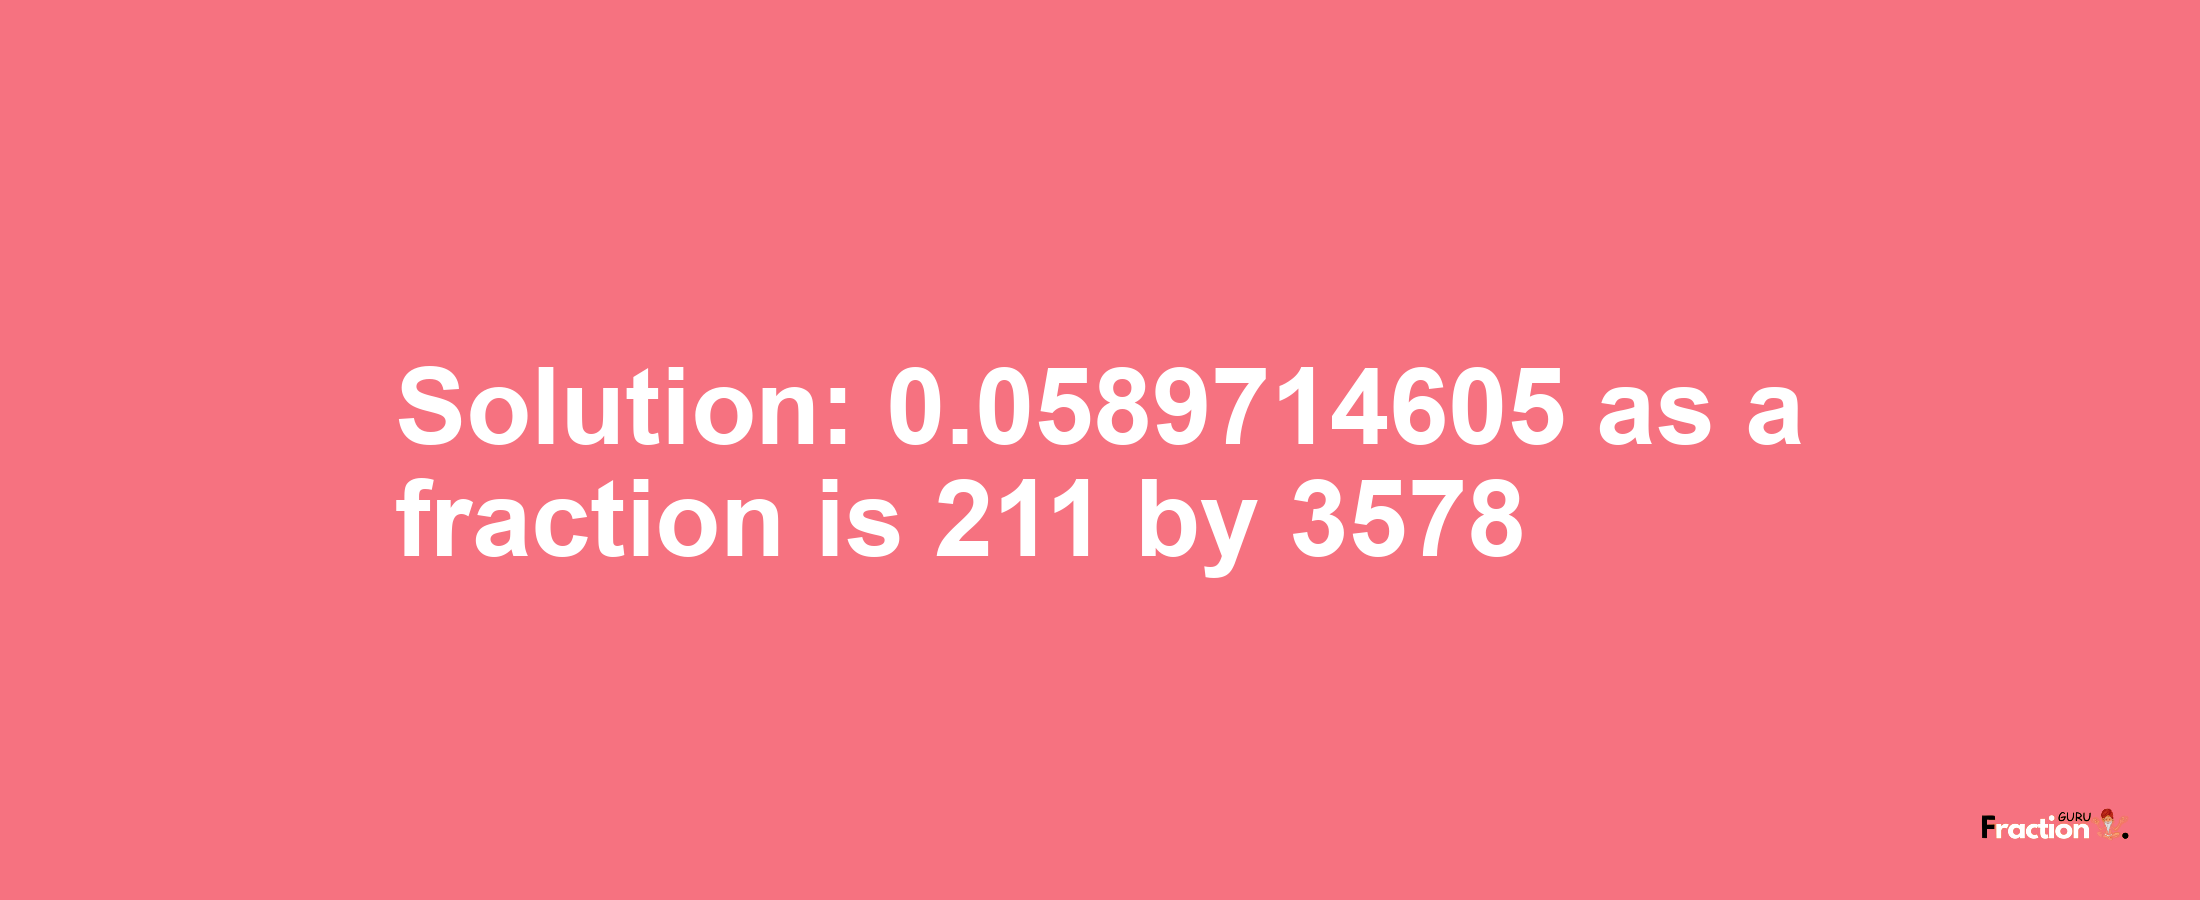 Solution:0.0589714605 as a fraction is 211/3578